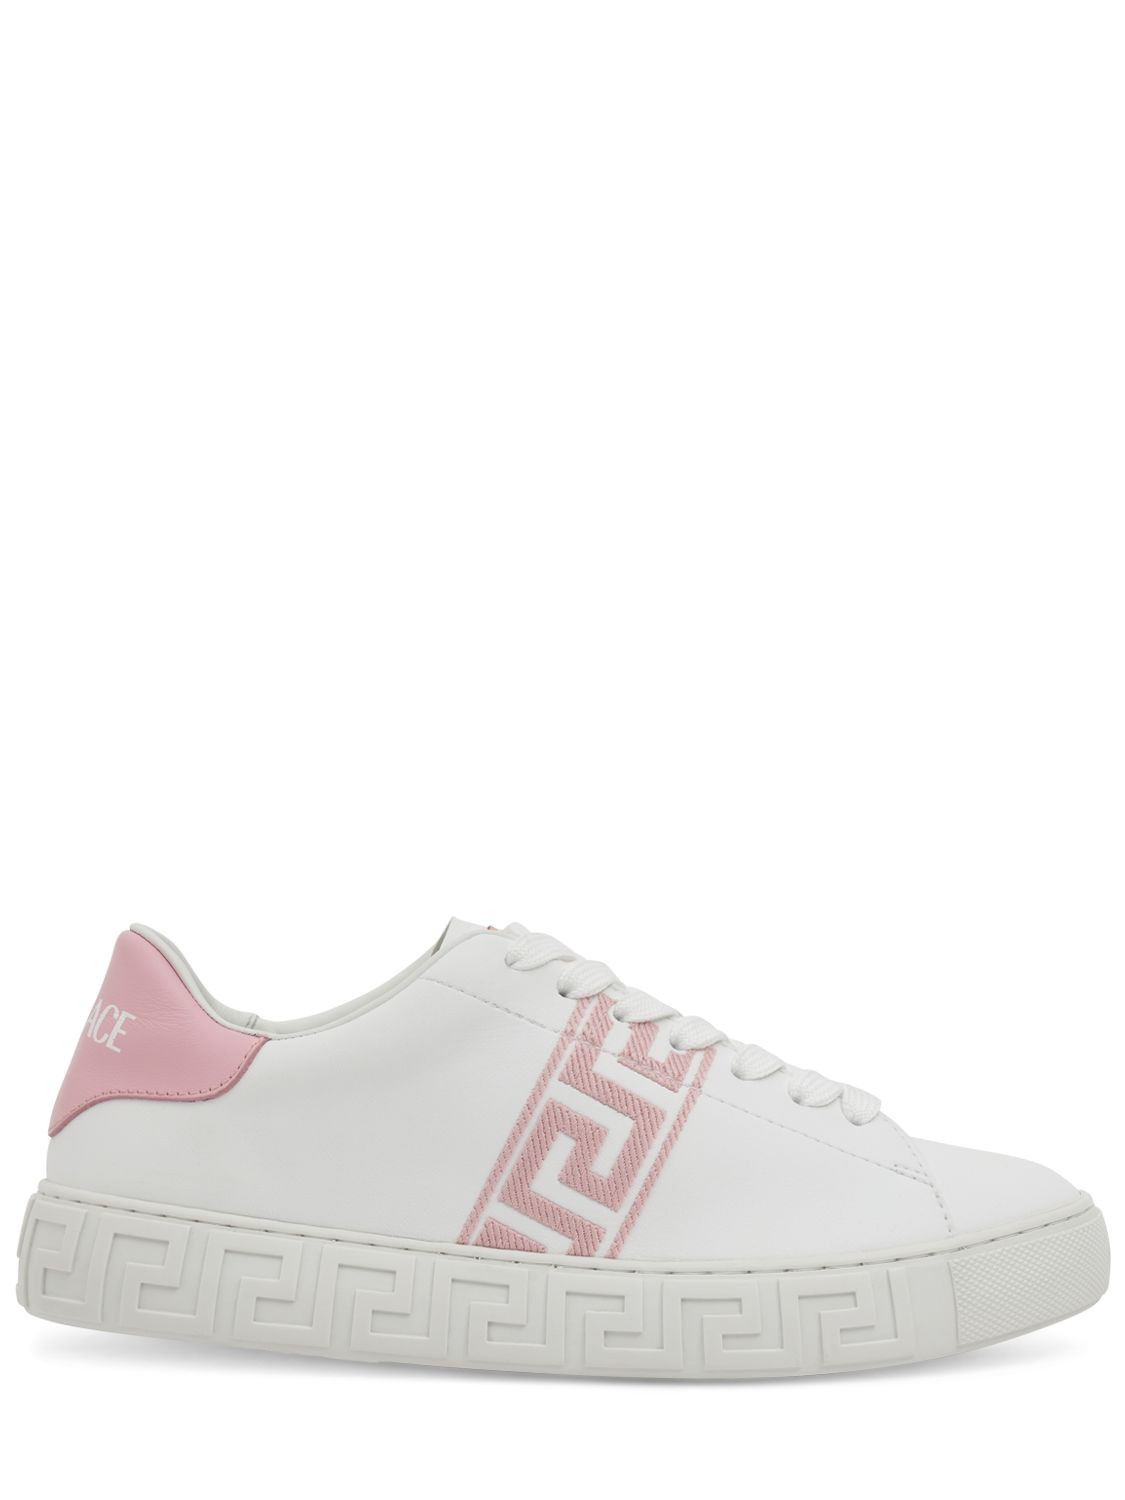 Embroidered Faux Leather Sneakers